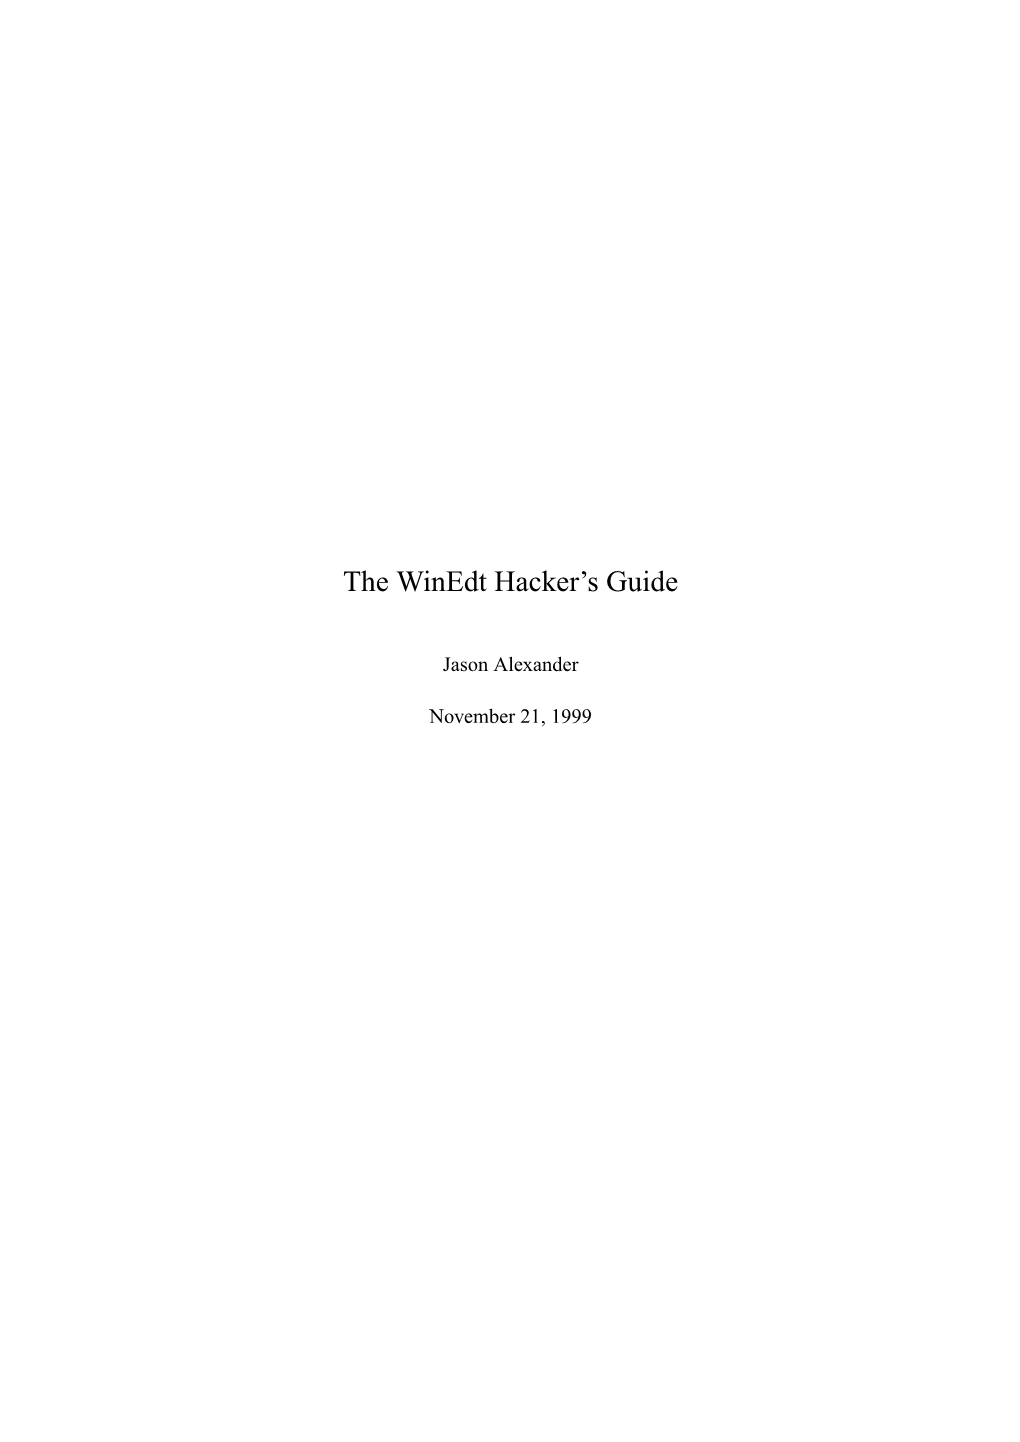 The Winedt Hacker's Guide